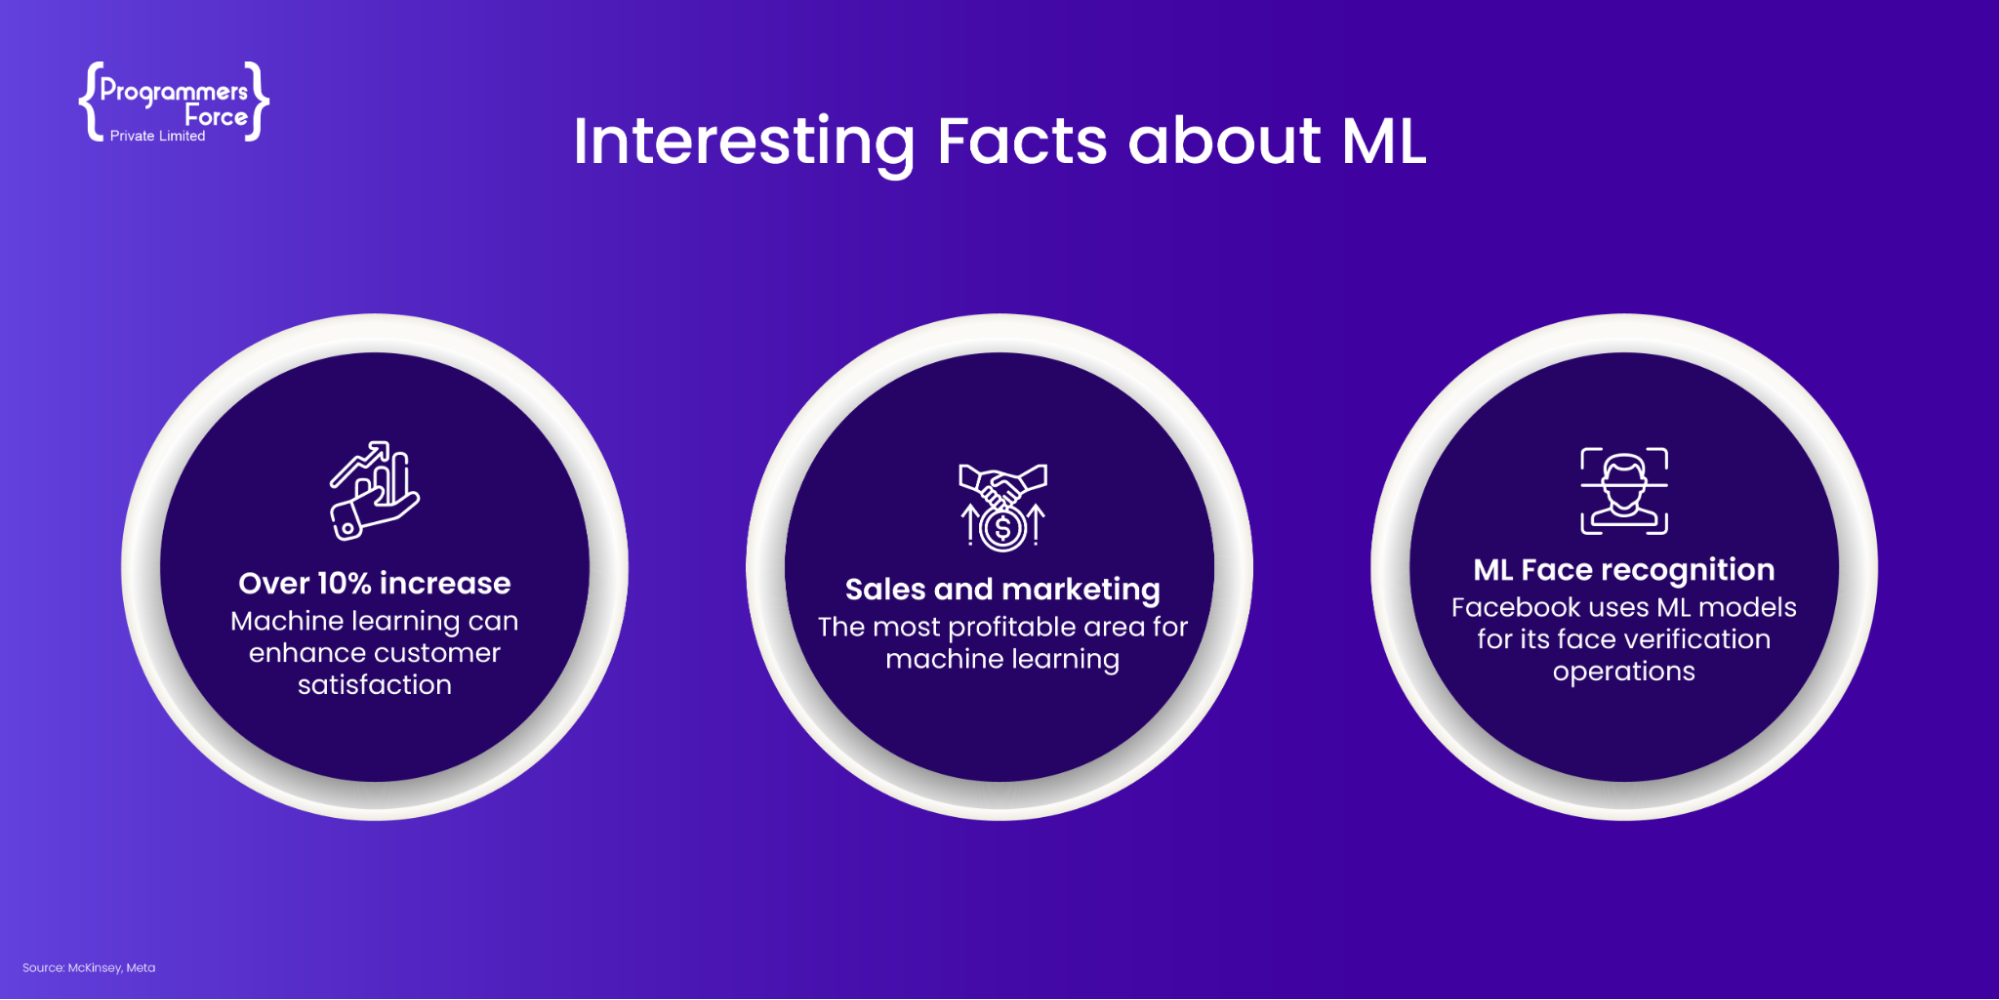 Interesting Facts about ML